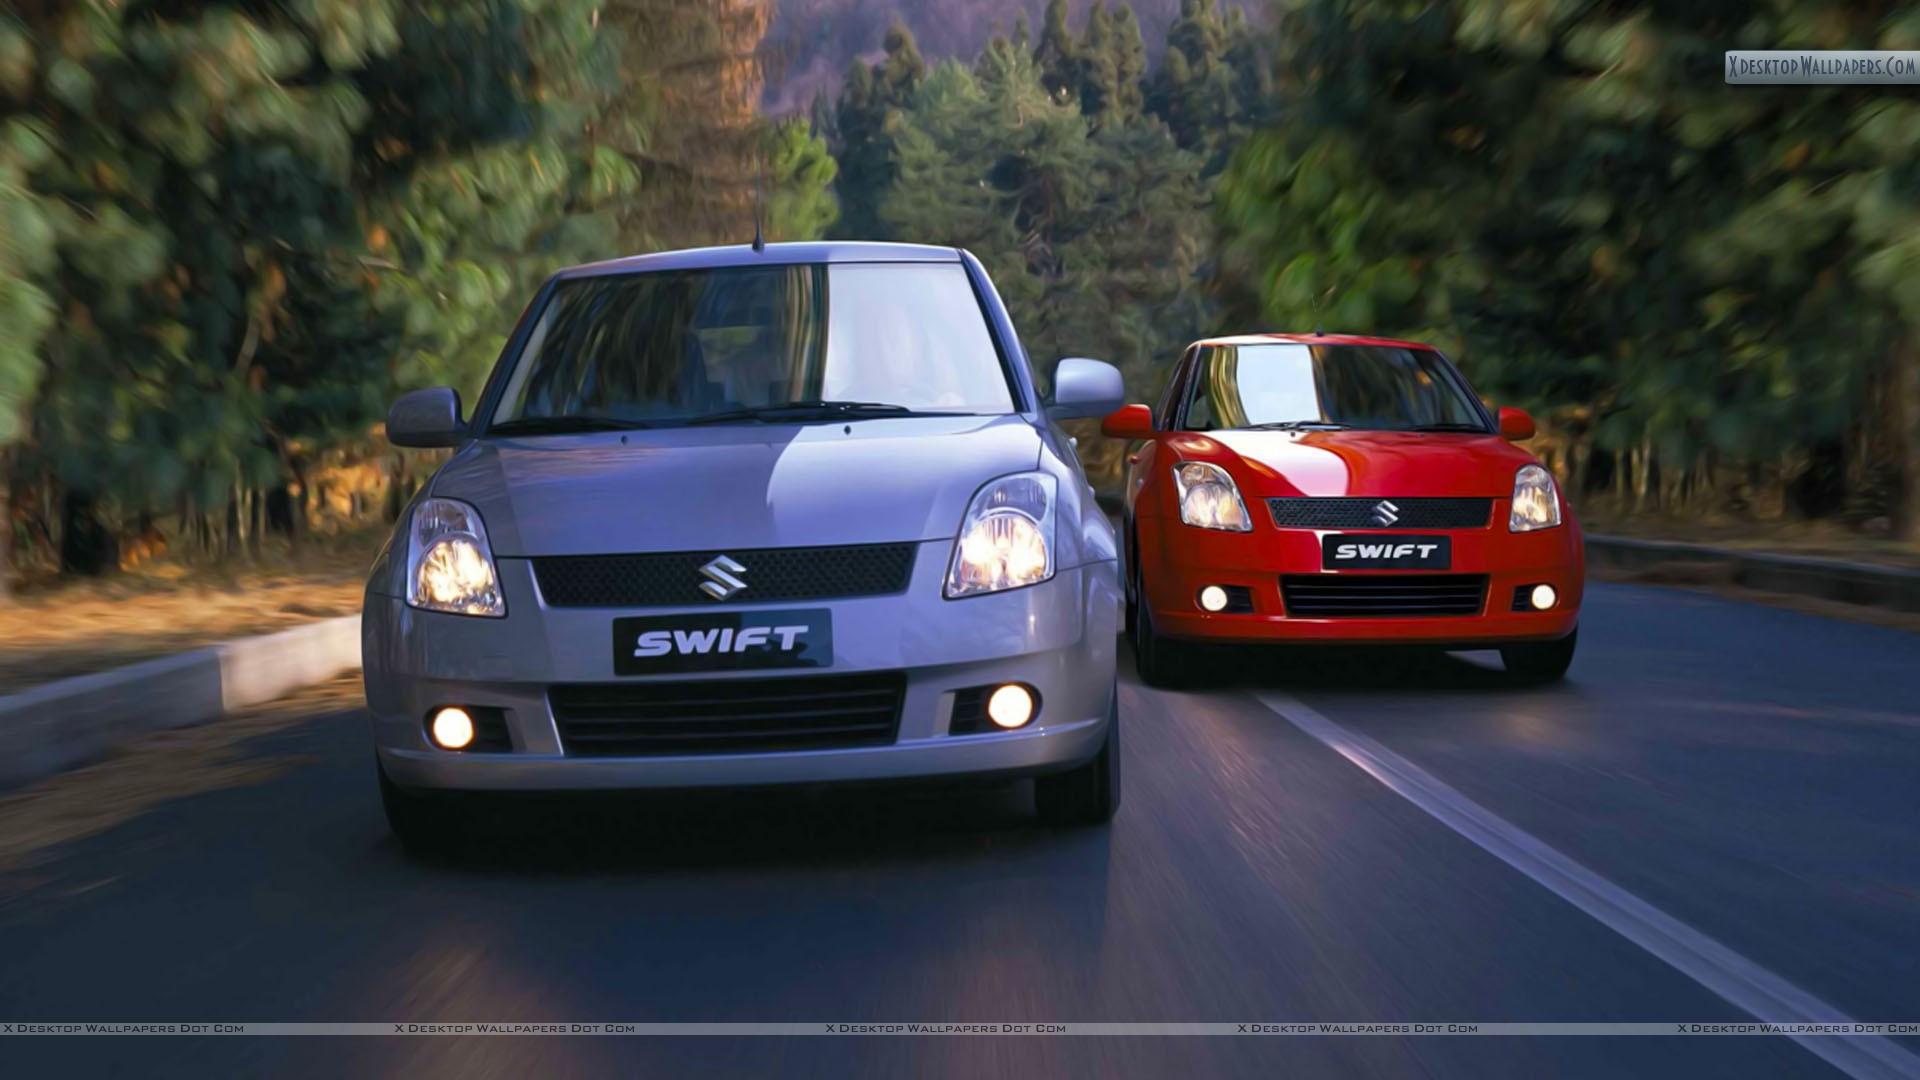 Suzuki Swift Car On The Road Wallpaper And Image